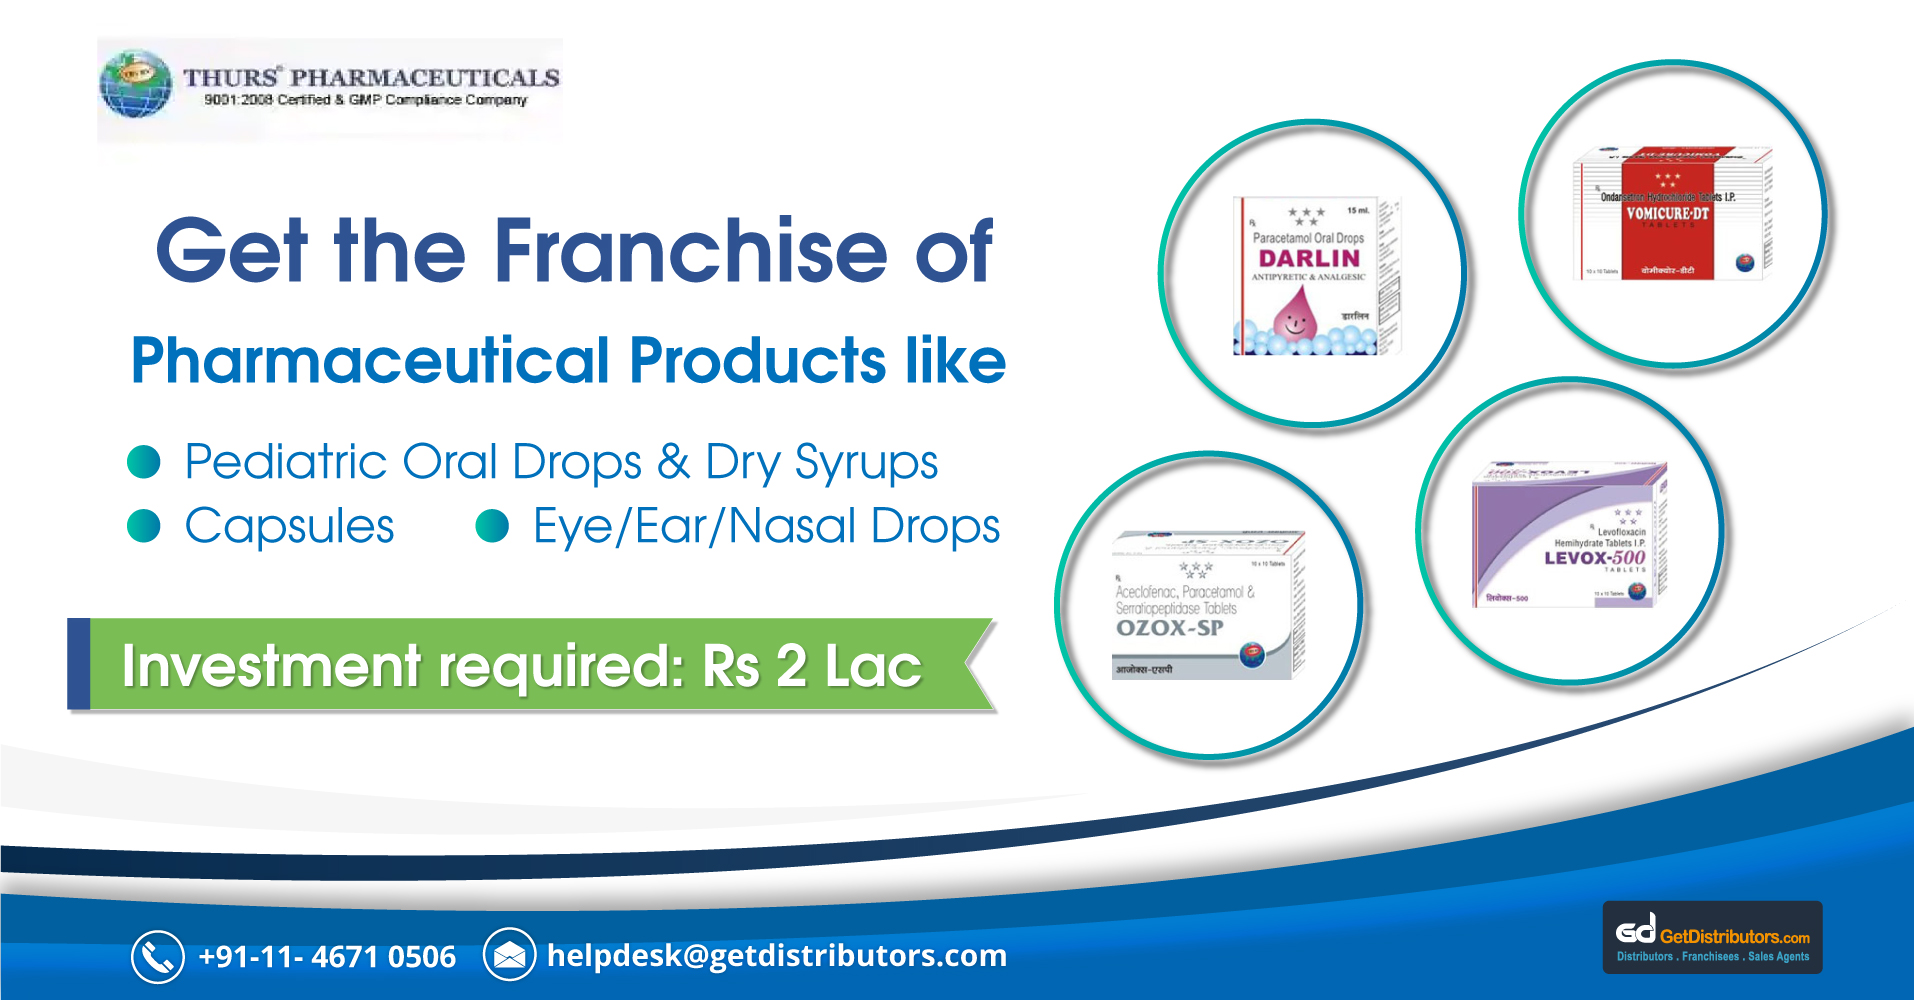 Offering A Highly Effective Range Of Pharmaceutical Products At Pocket-Friendly Rates